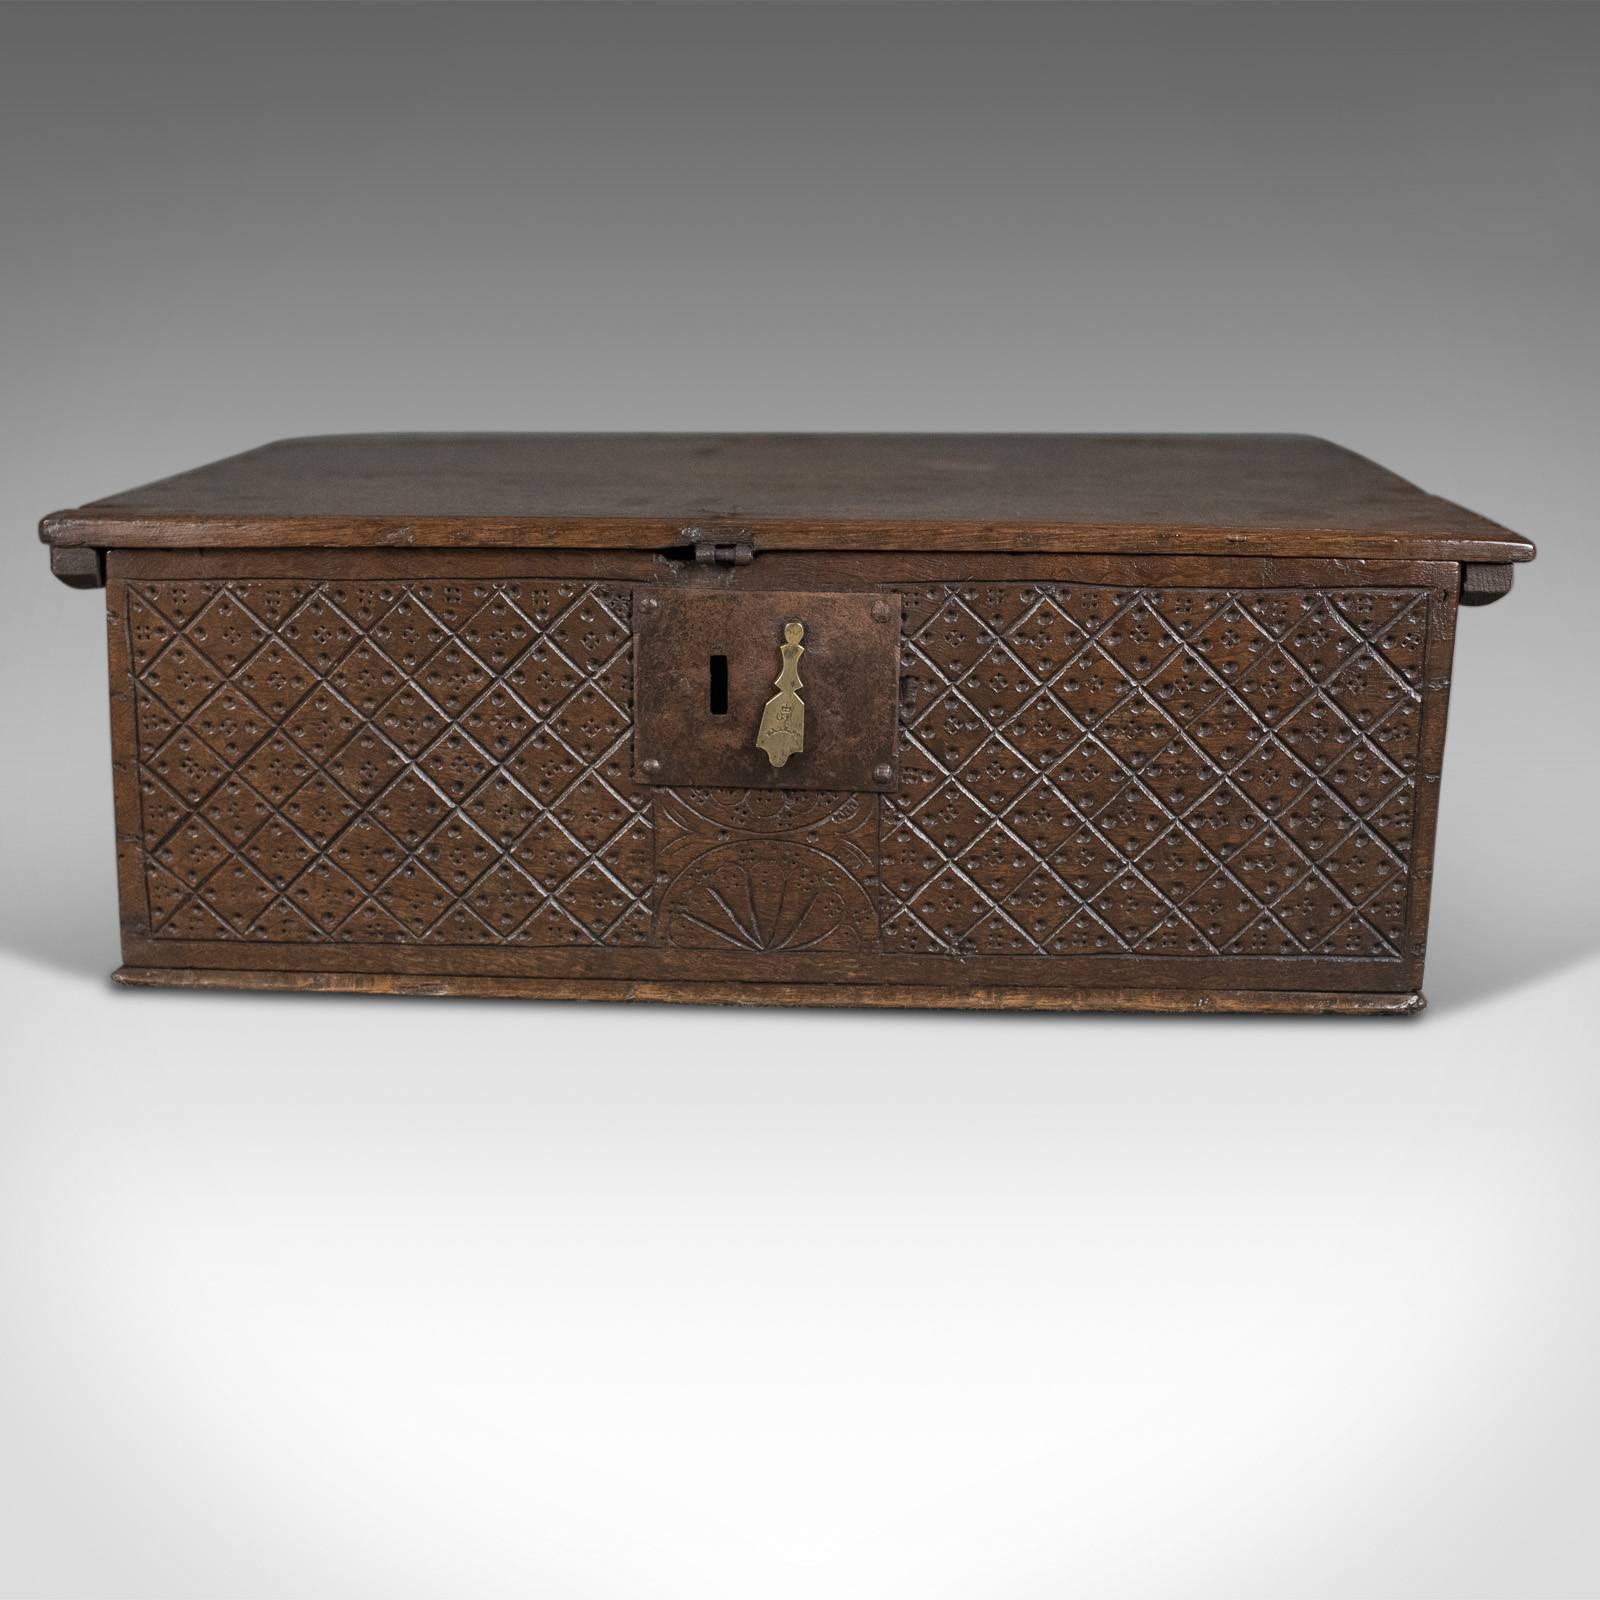 This is an antique bible box in English oak, a chest dating to circa 1700.

Charming country piece with huge character
Dark oak displaying medullary rays inside the lid
Desirable aged patina

Front displays diamond geometric carved